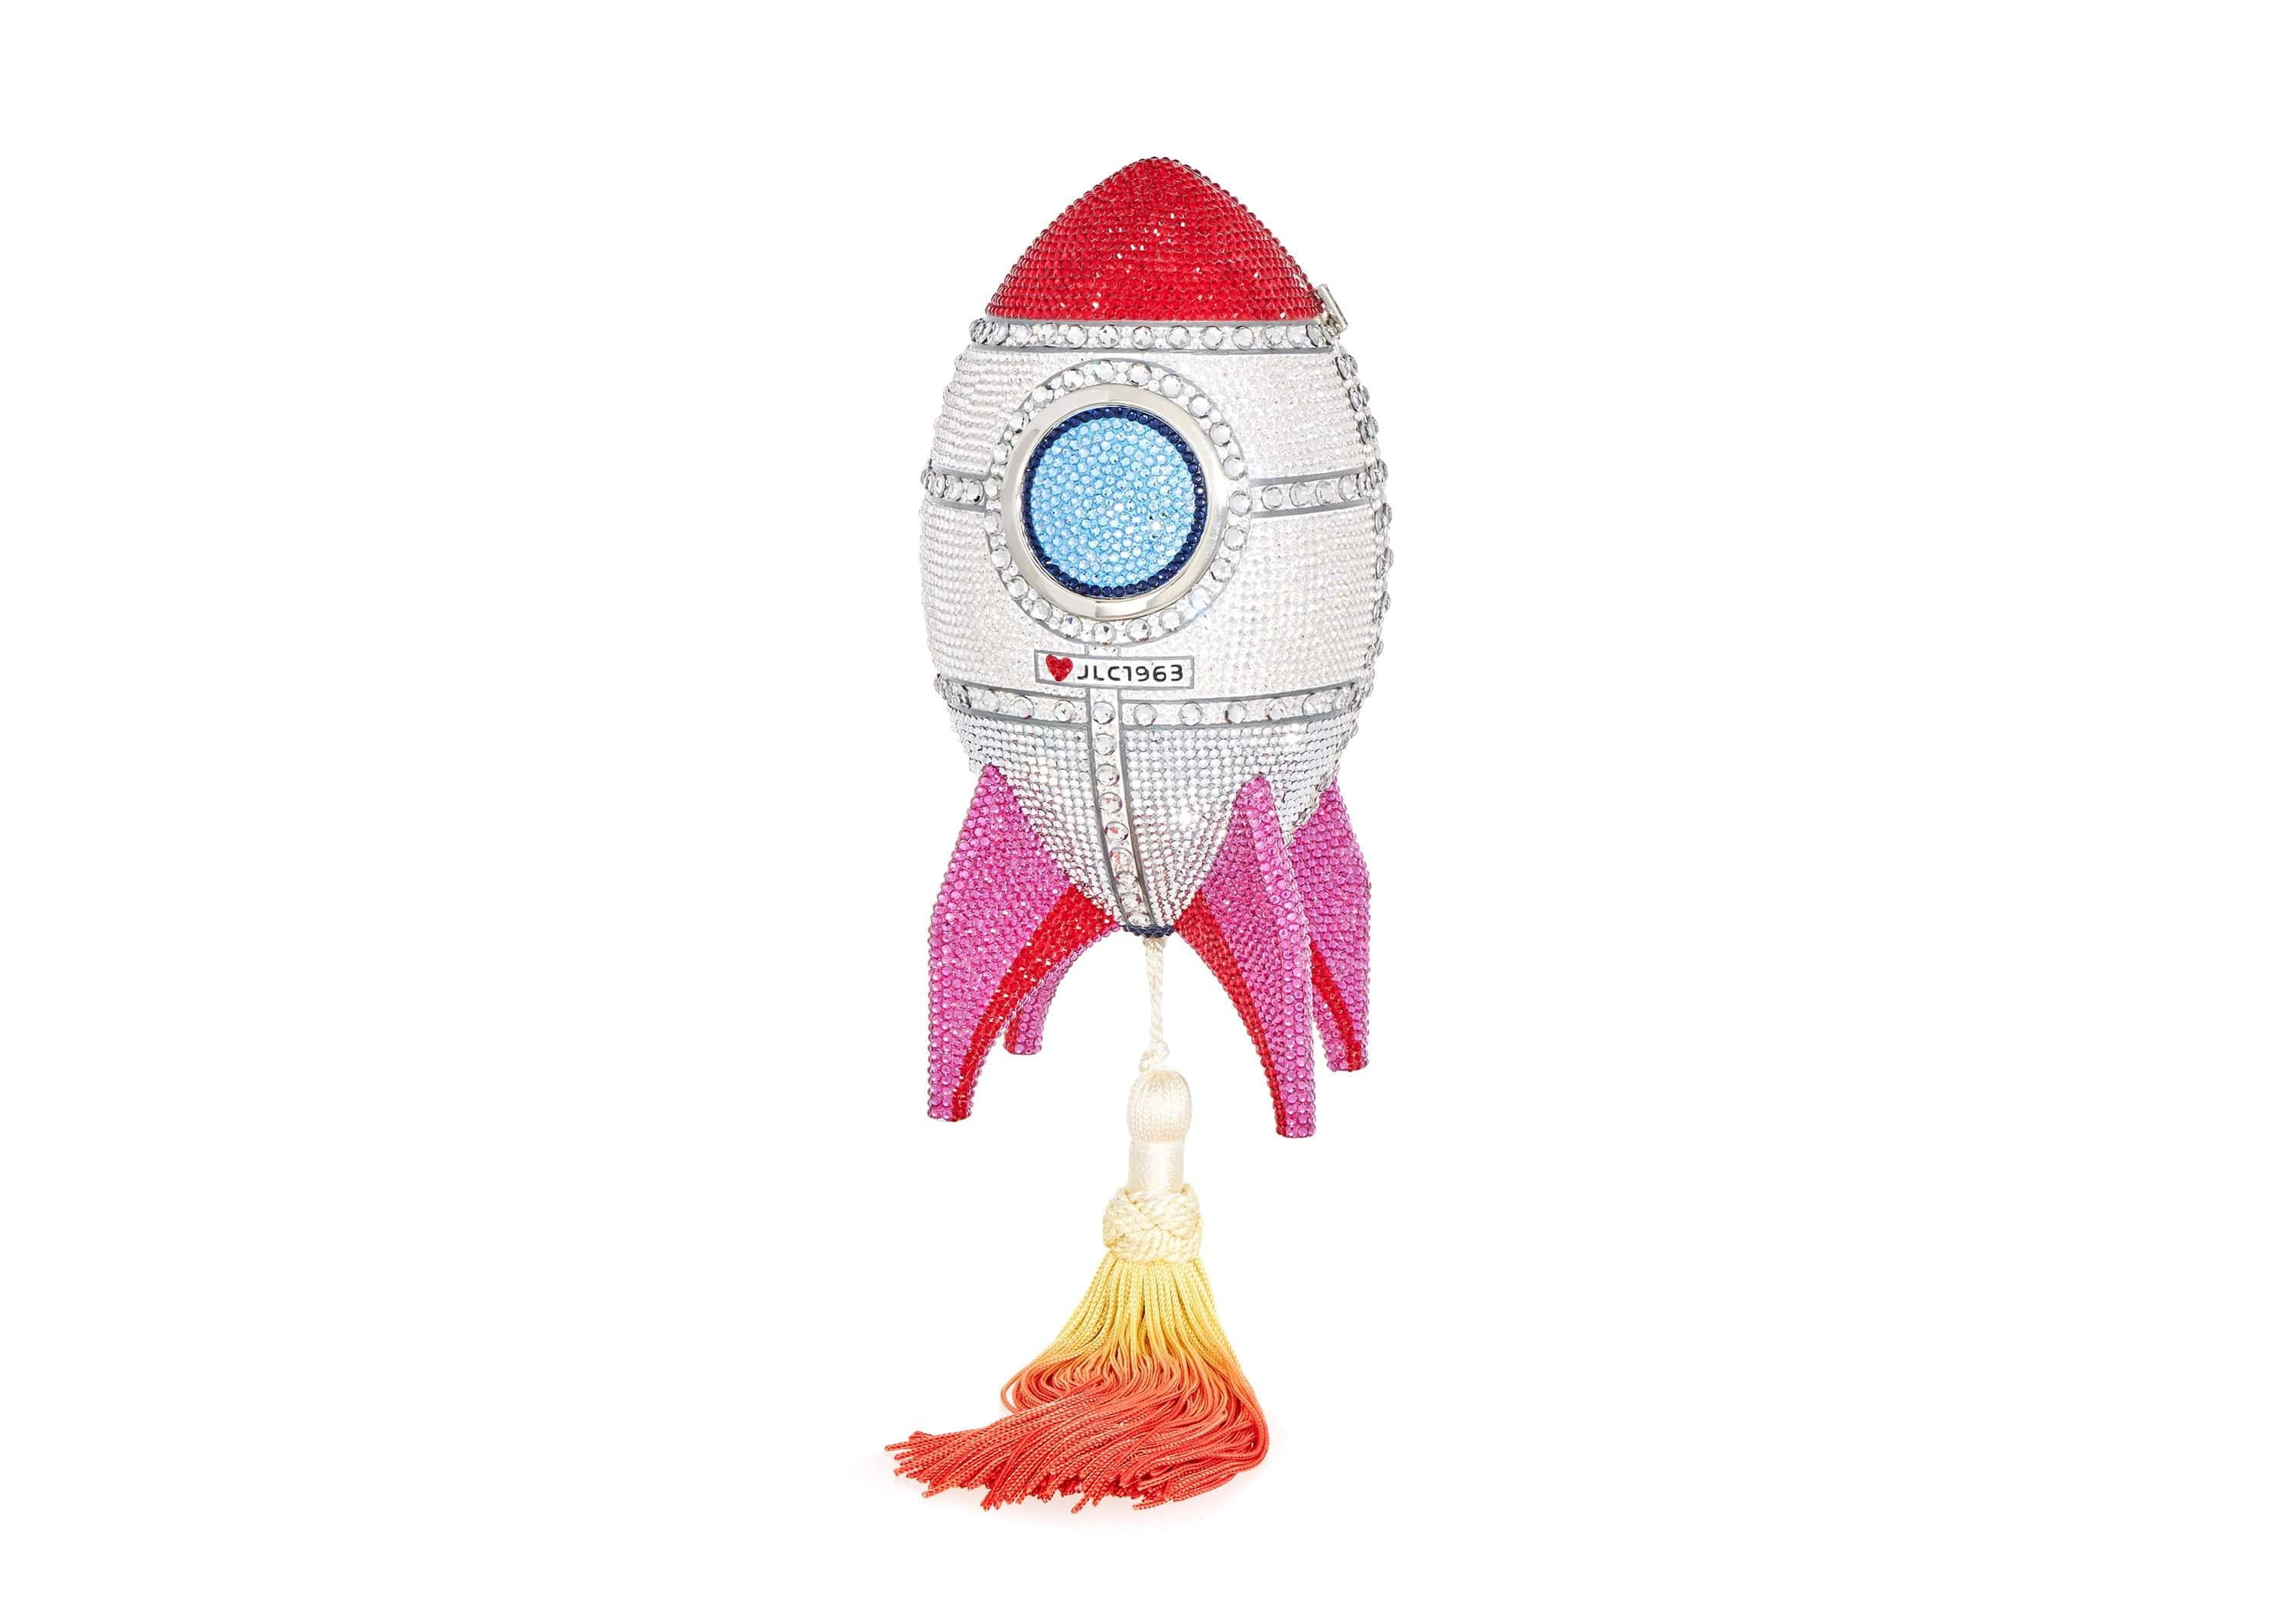 Rocket Space Ship Clutch with Removable Wristlet Strap